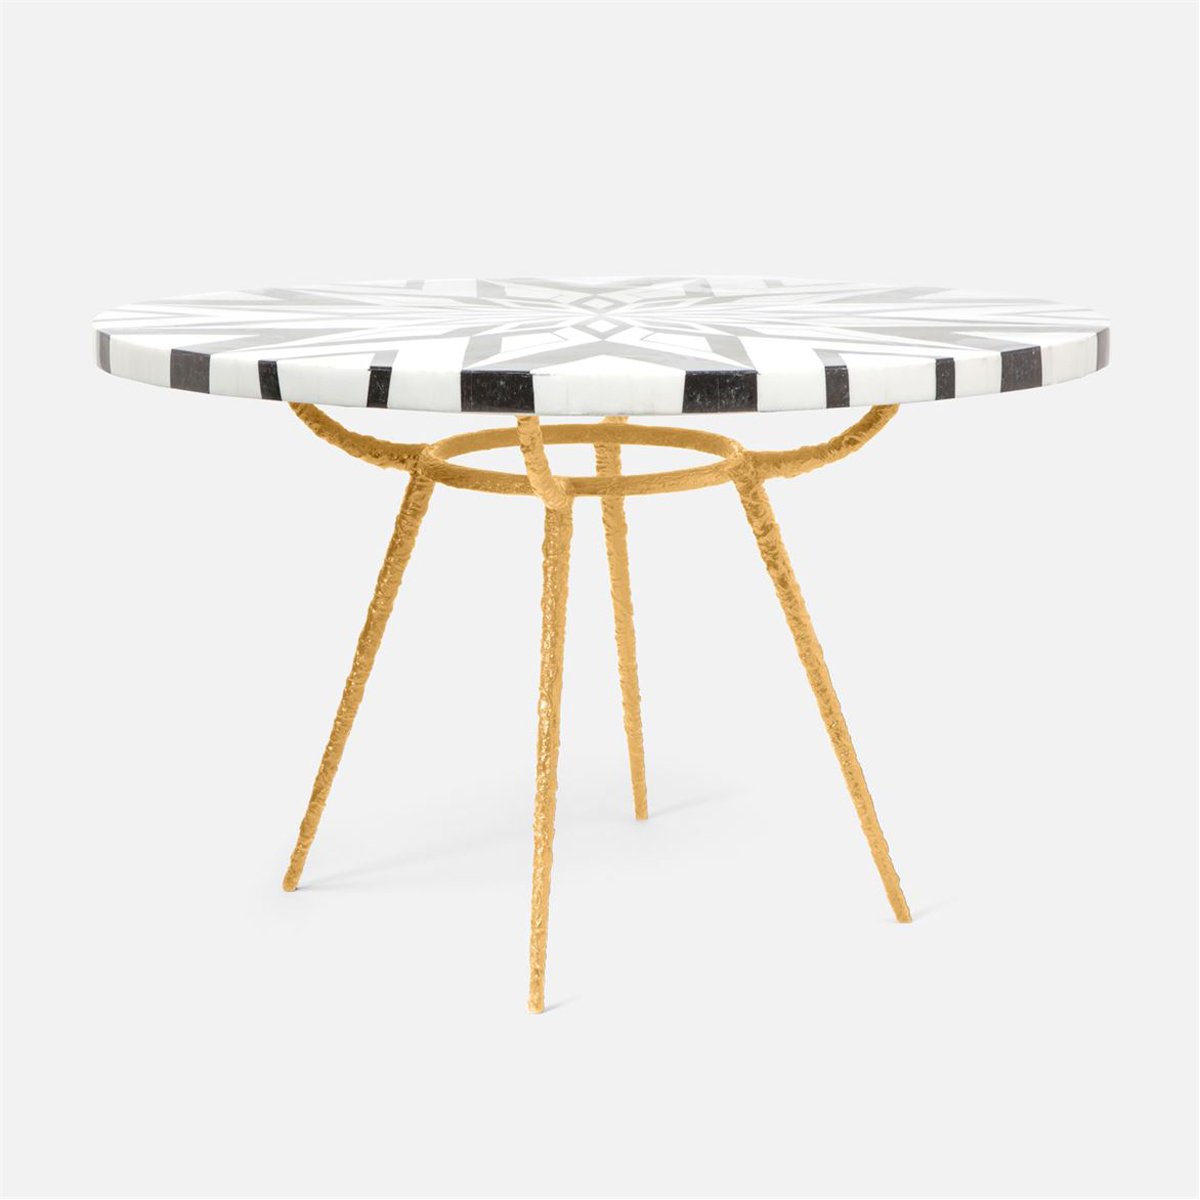 Made Goods Grace Pitted Iron Dining Table in Black/White Geometric Marble